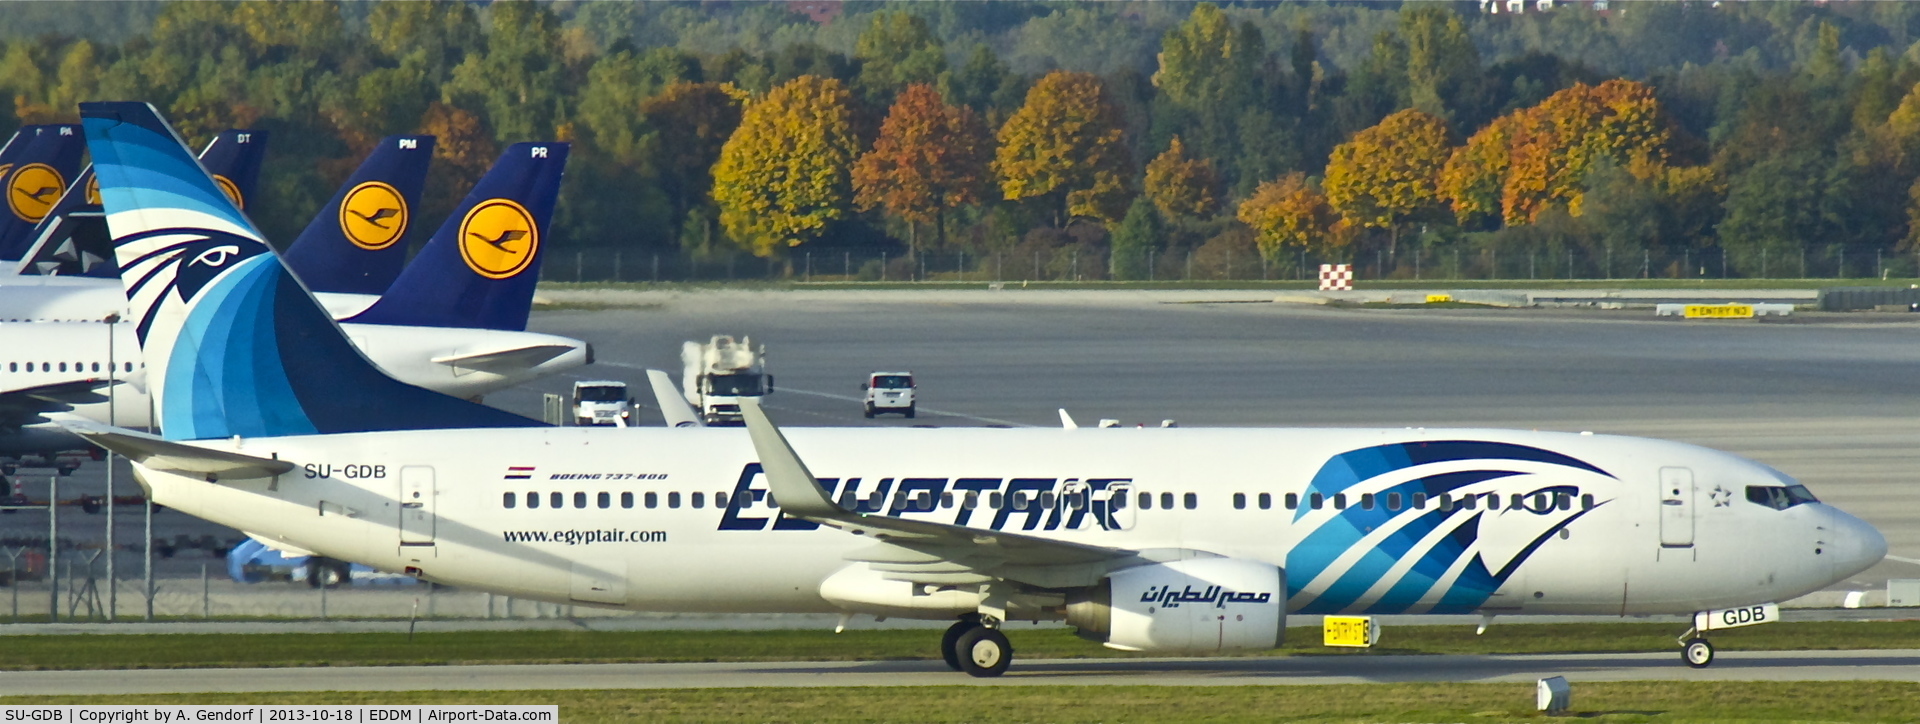 SU-GDB, 2009 Boeing 737-866 C/N 35567, Egypt Air, is seen here taxiing to the gate at München(EDDM)